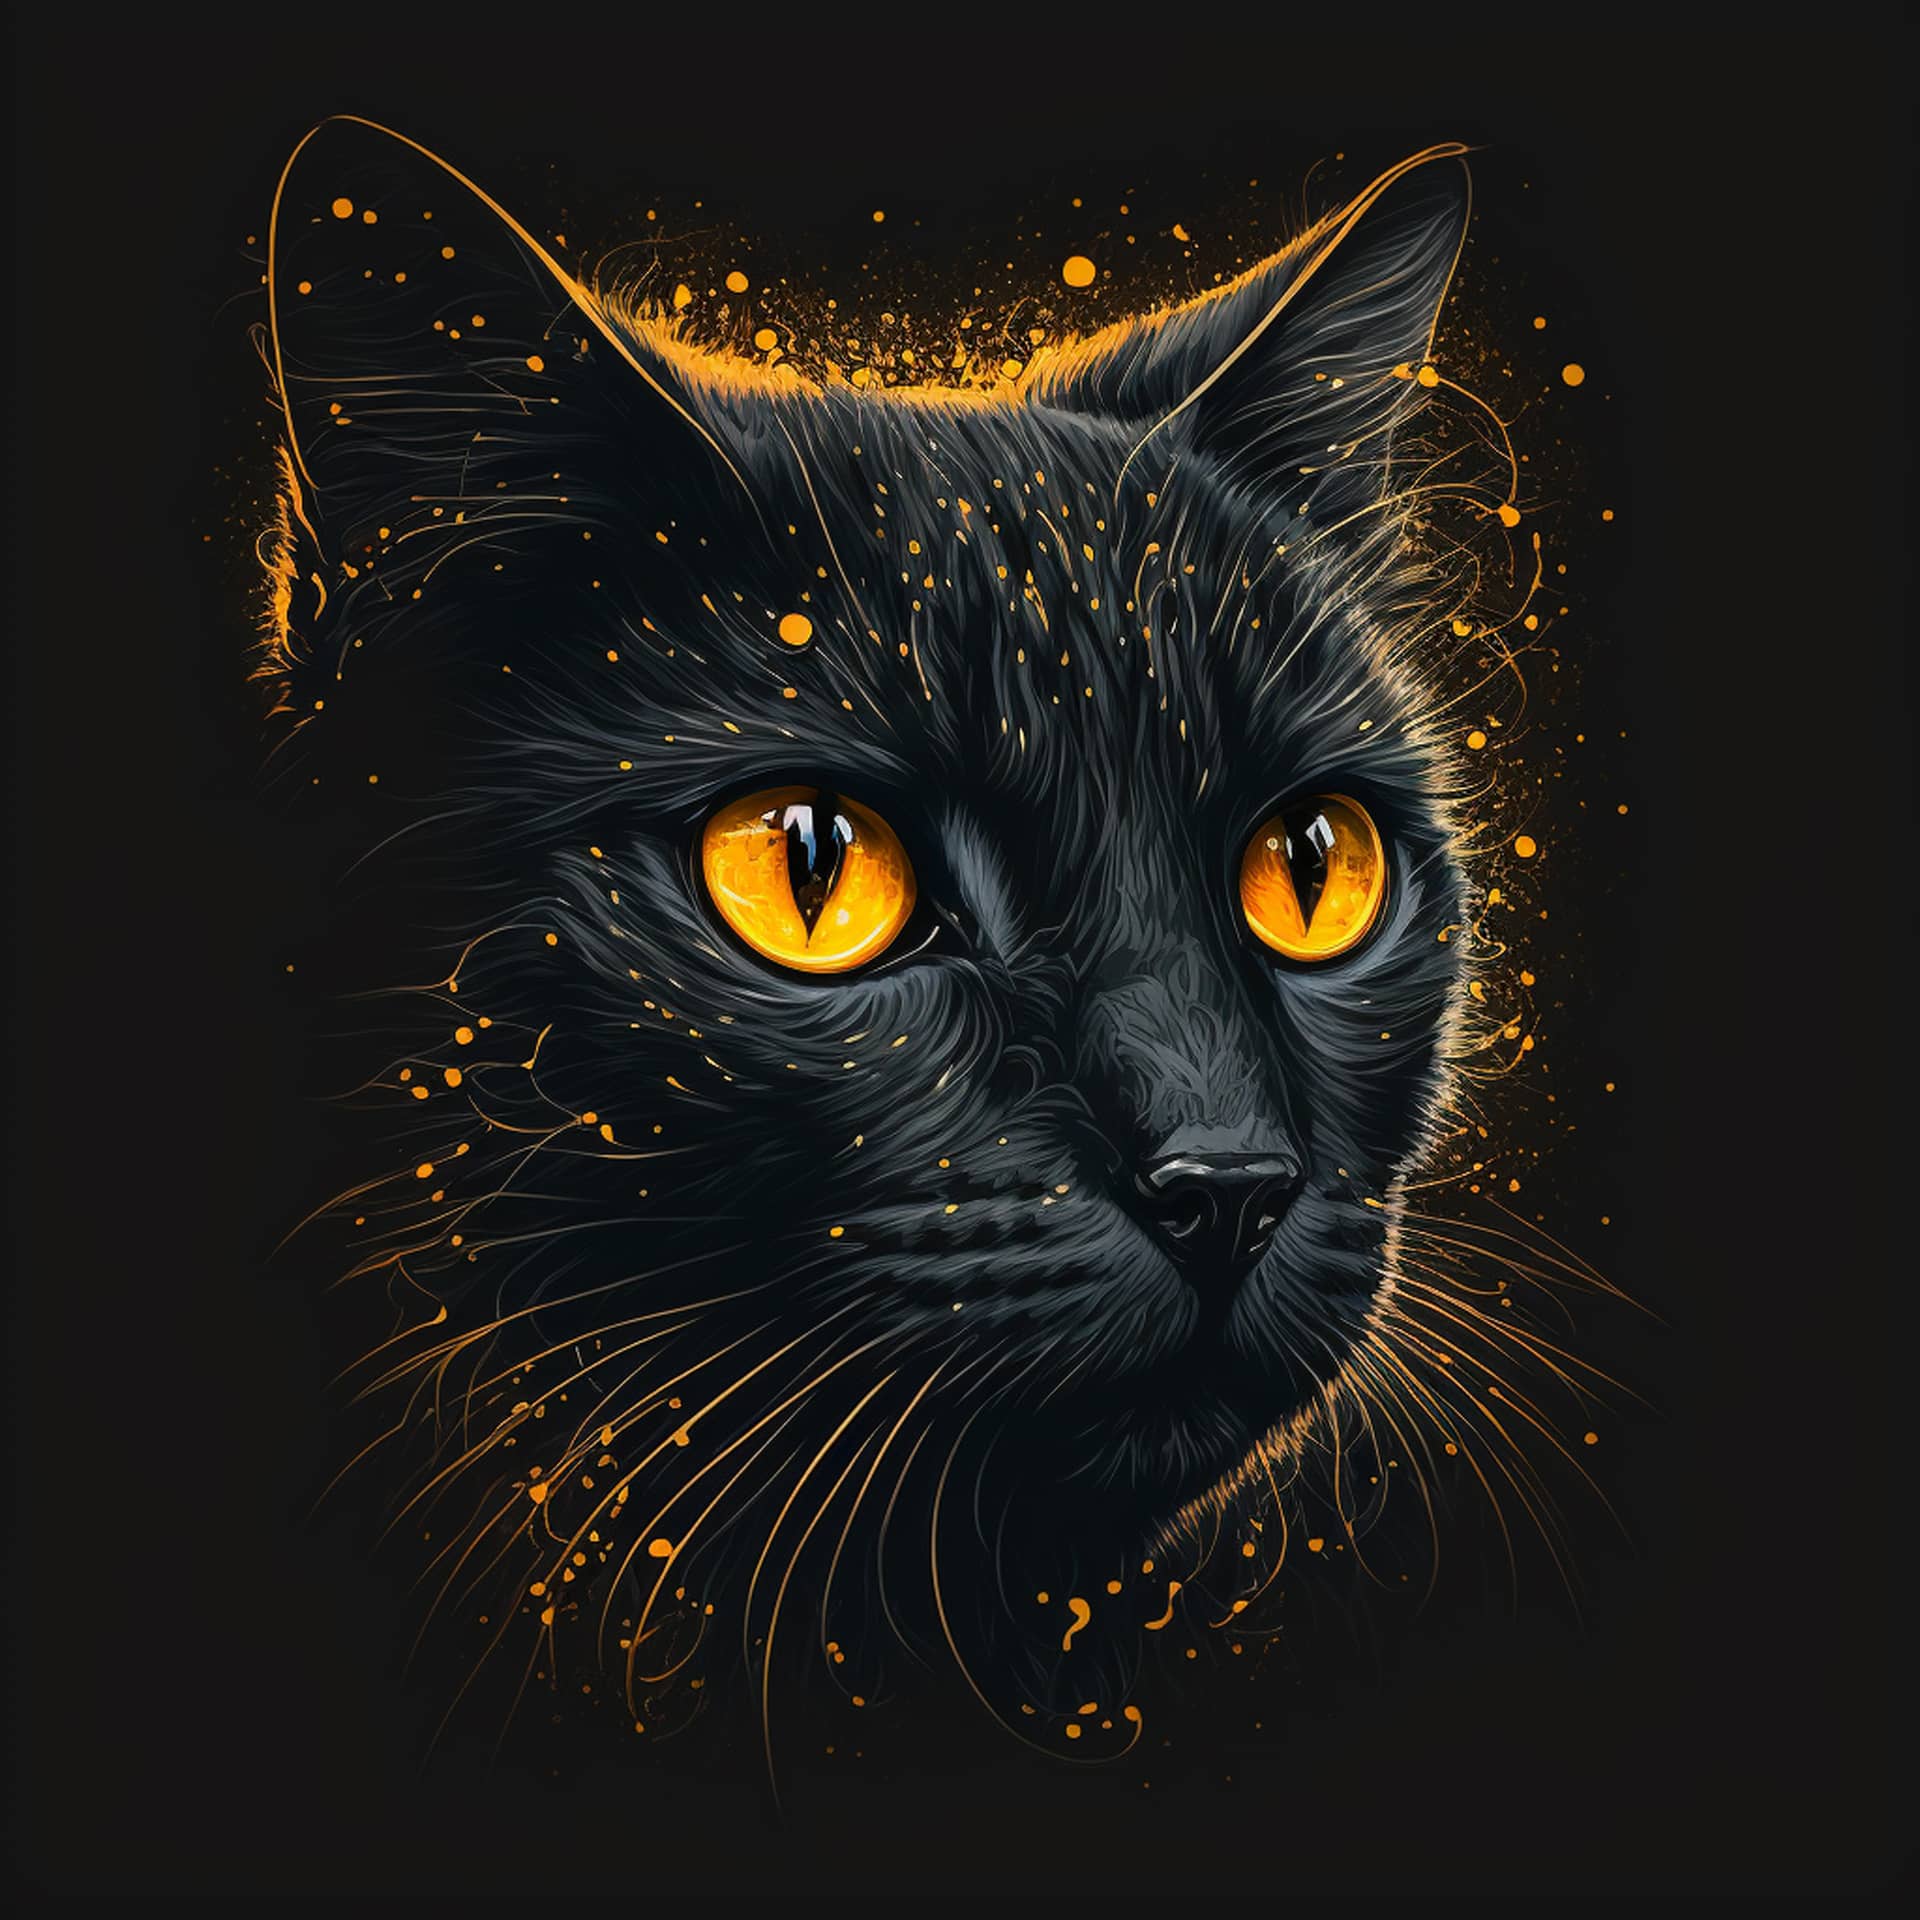 Fb profile pic cat black background with bright yellow eyes image